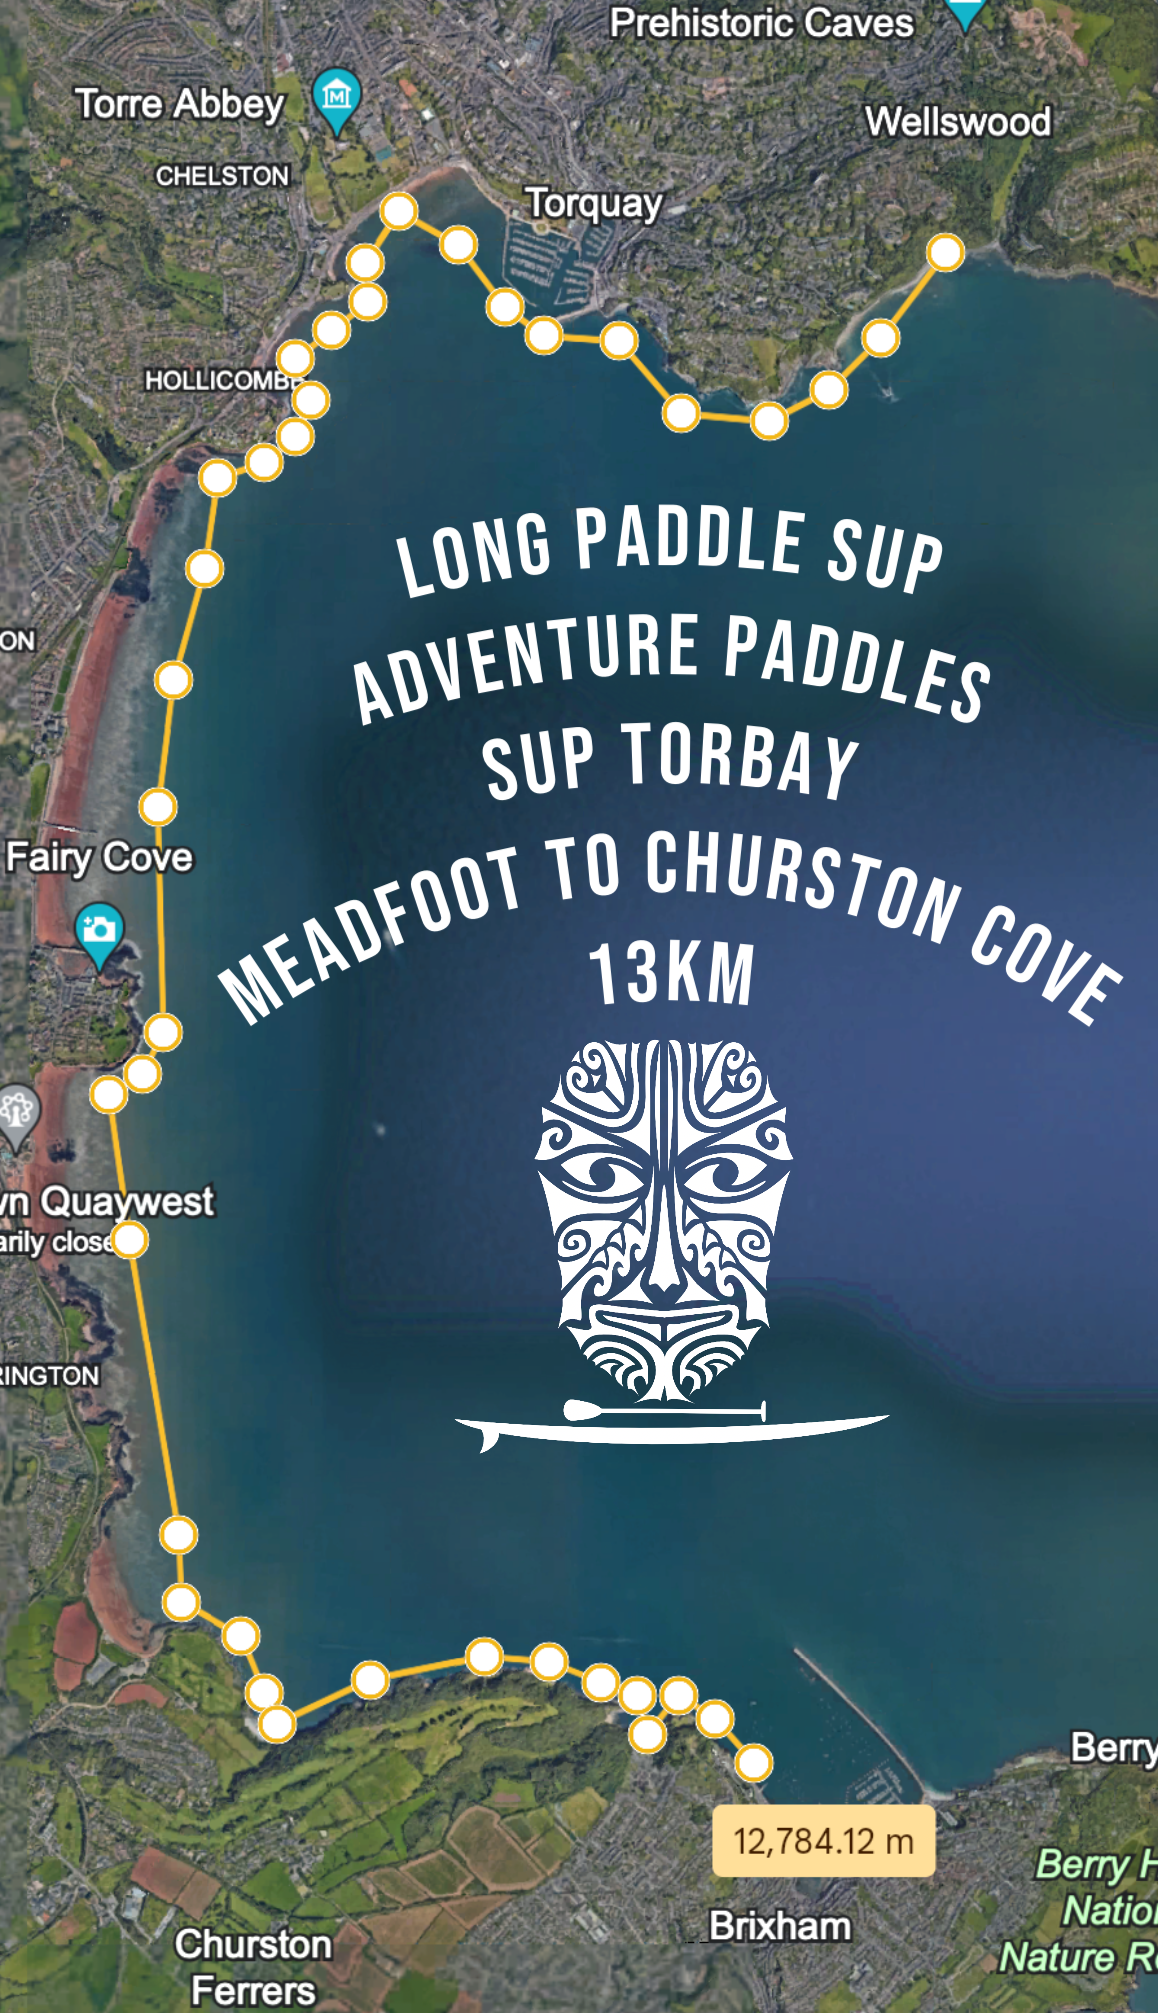 SUP Paddle Torbay- Meadfoot to Brixham 13km